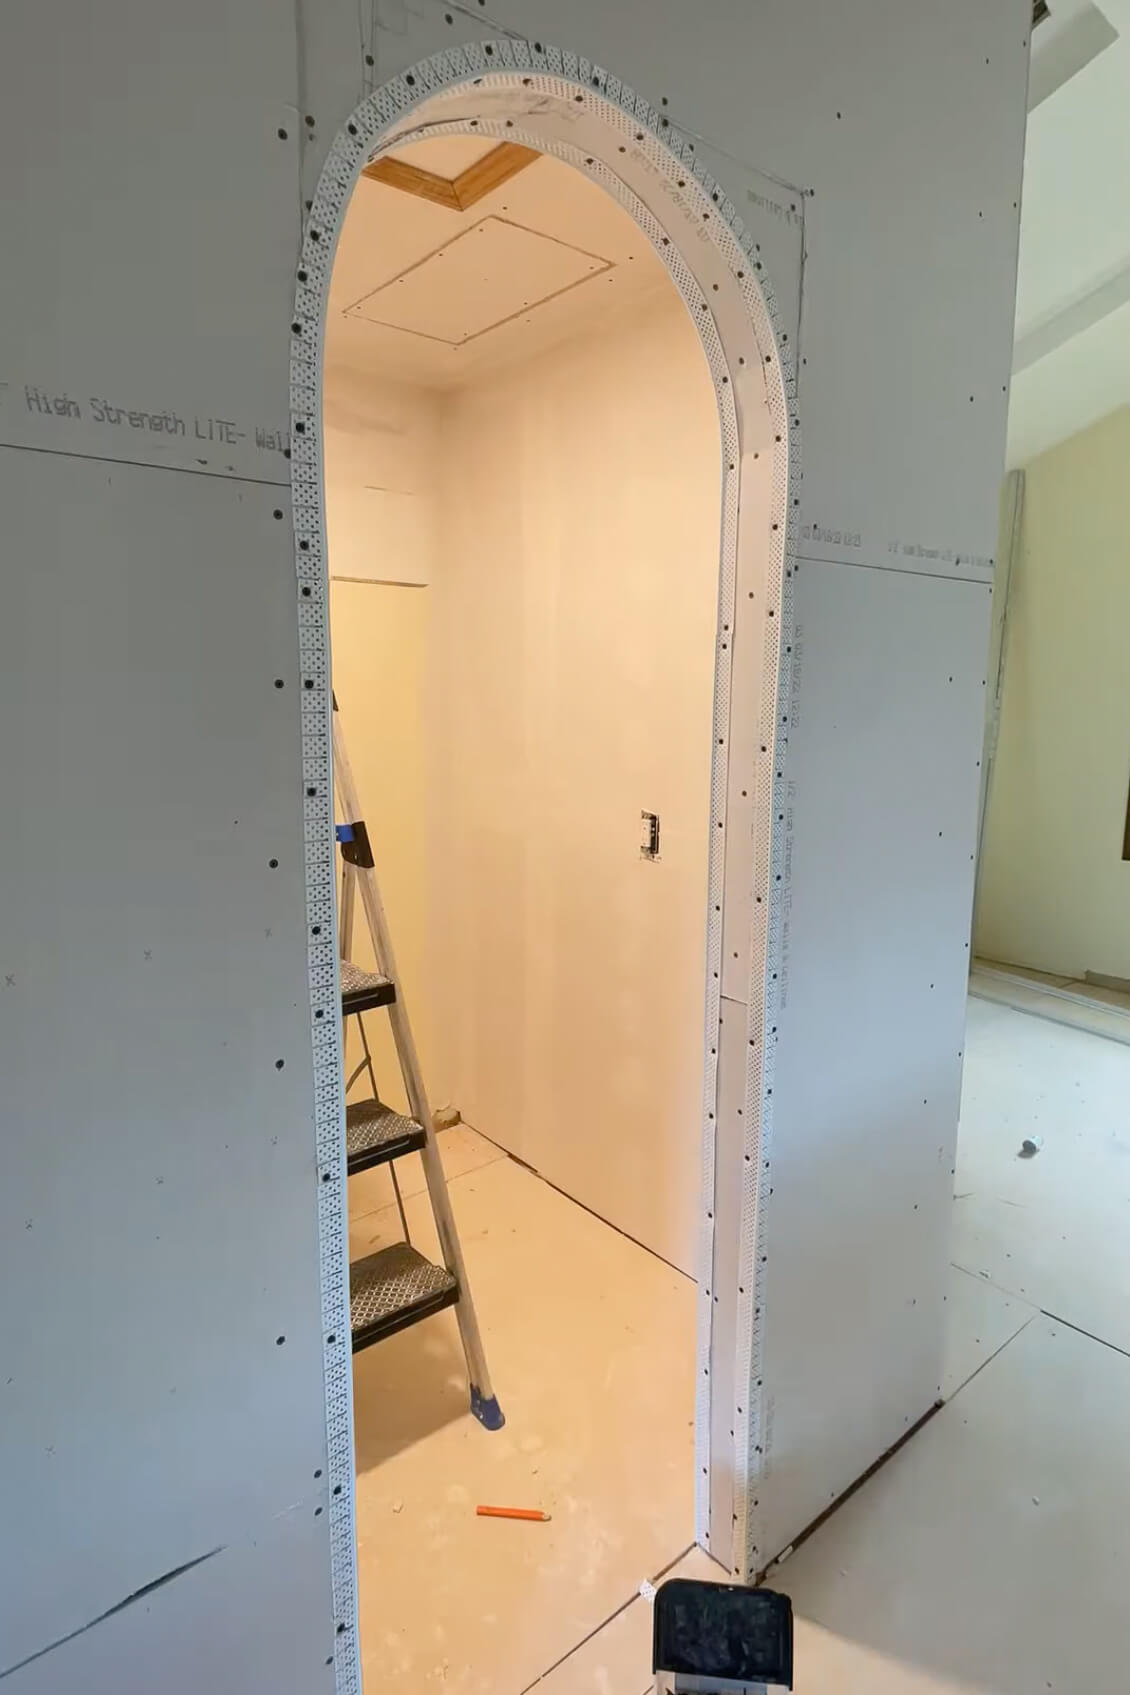 Finished drywall on an arched doorway.